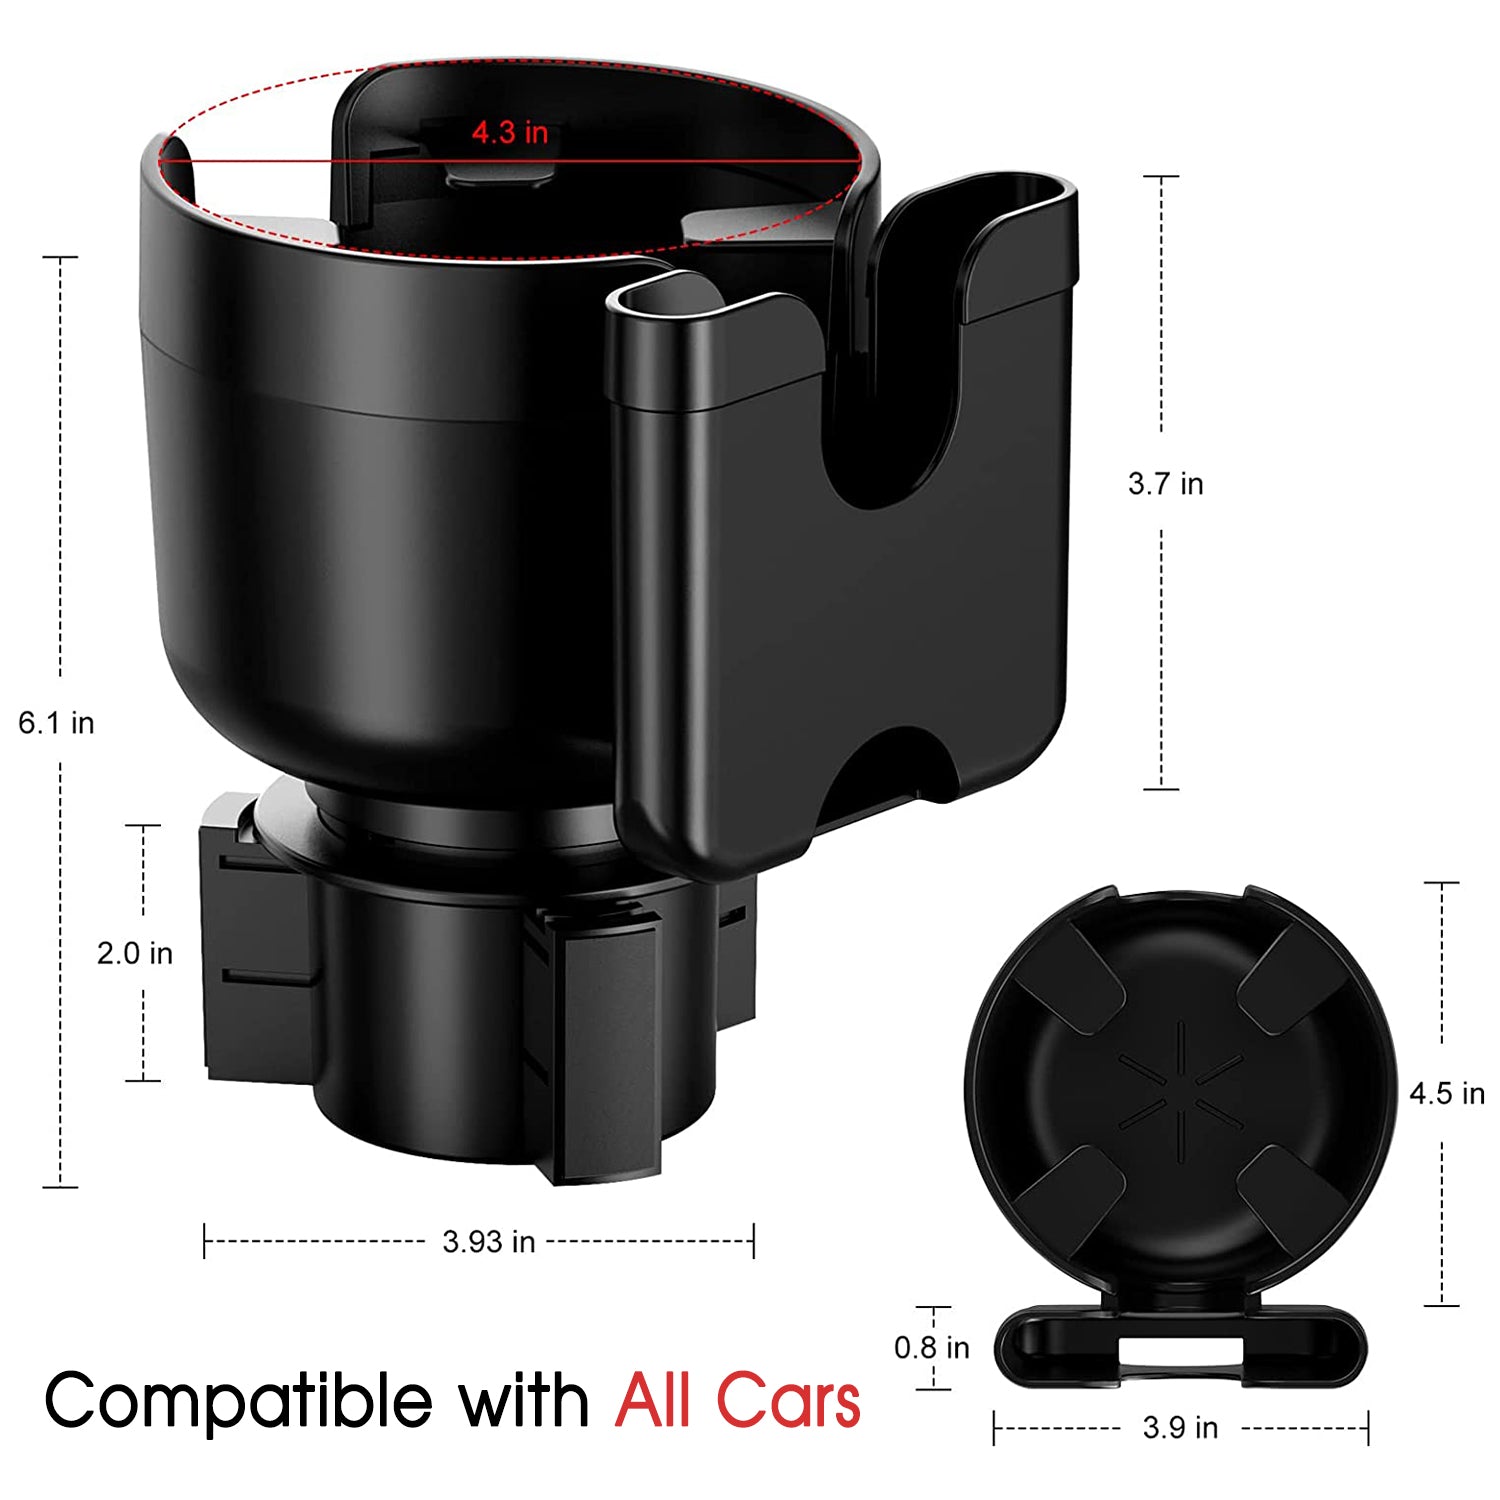 Custom Text For Car Cup Holder 2-in-1, Custom For Your Cars, Car Cup Holder Expander Adapter with Adjustable Base, Car Cup Holder Expander Organizer with Phone Holder CC15988